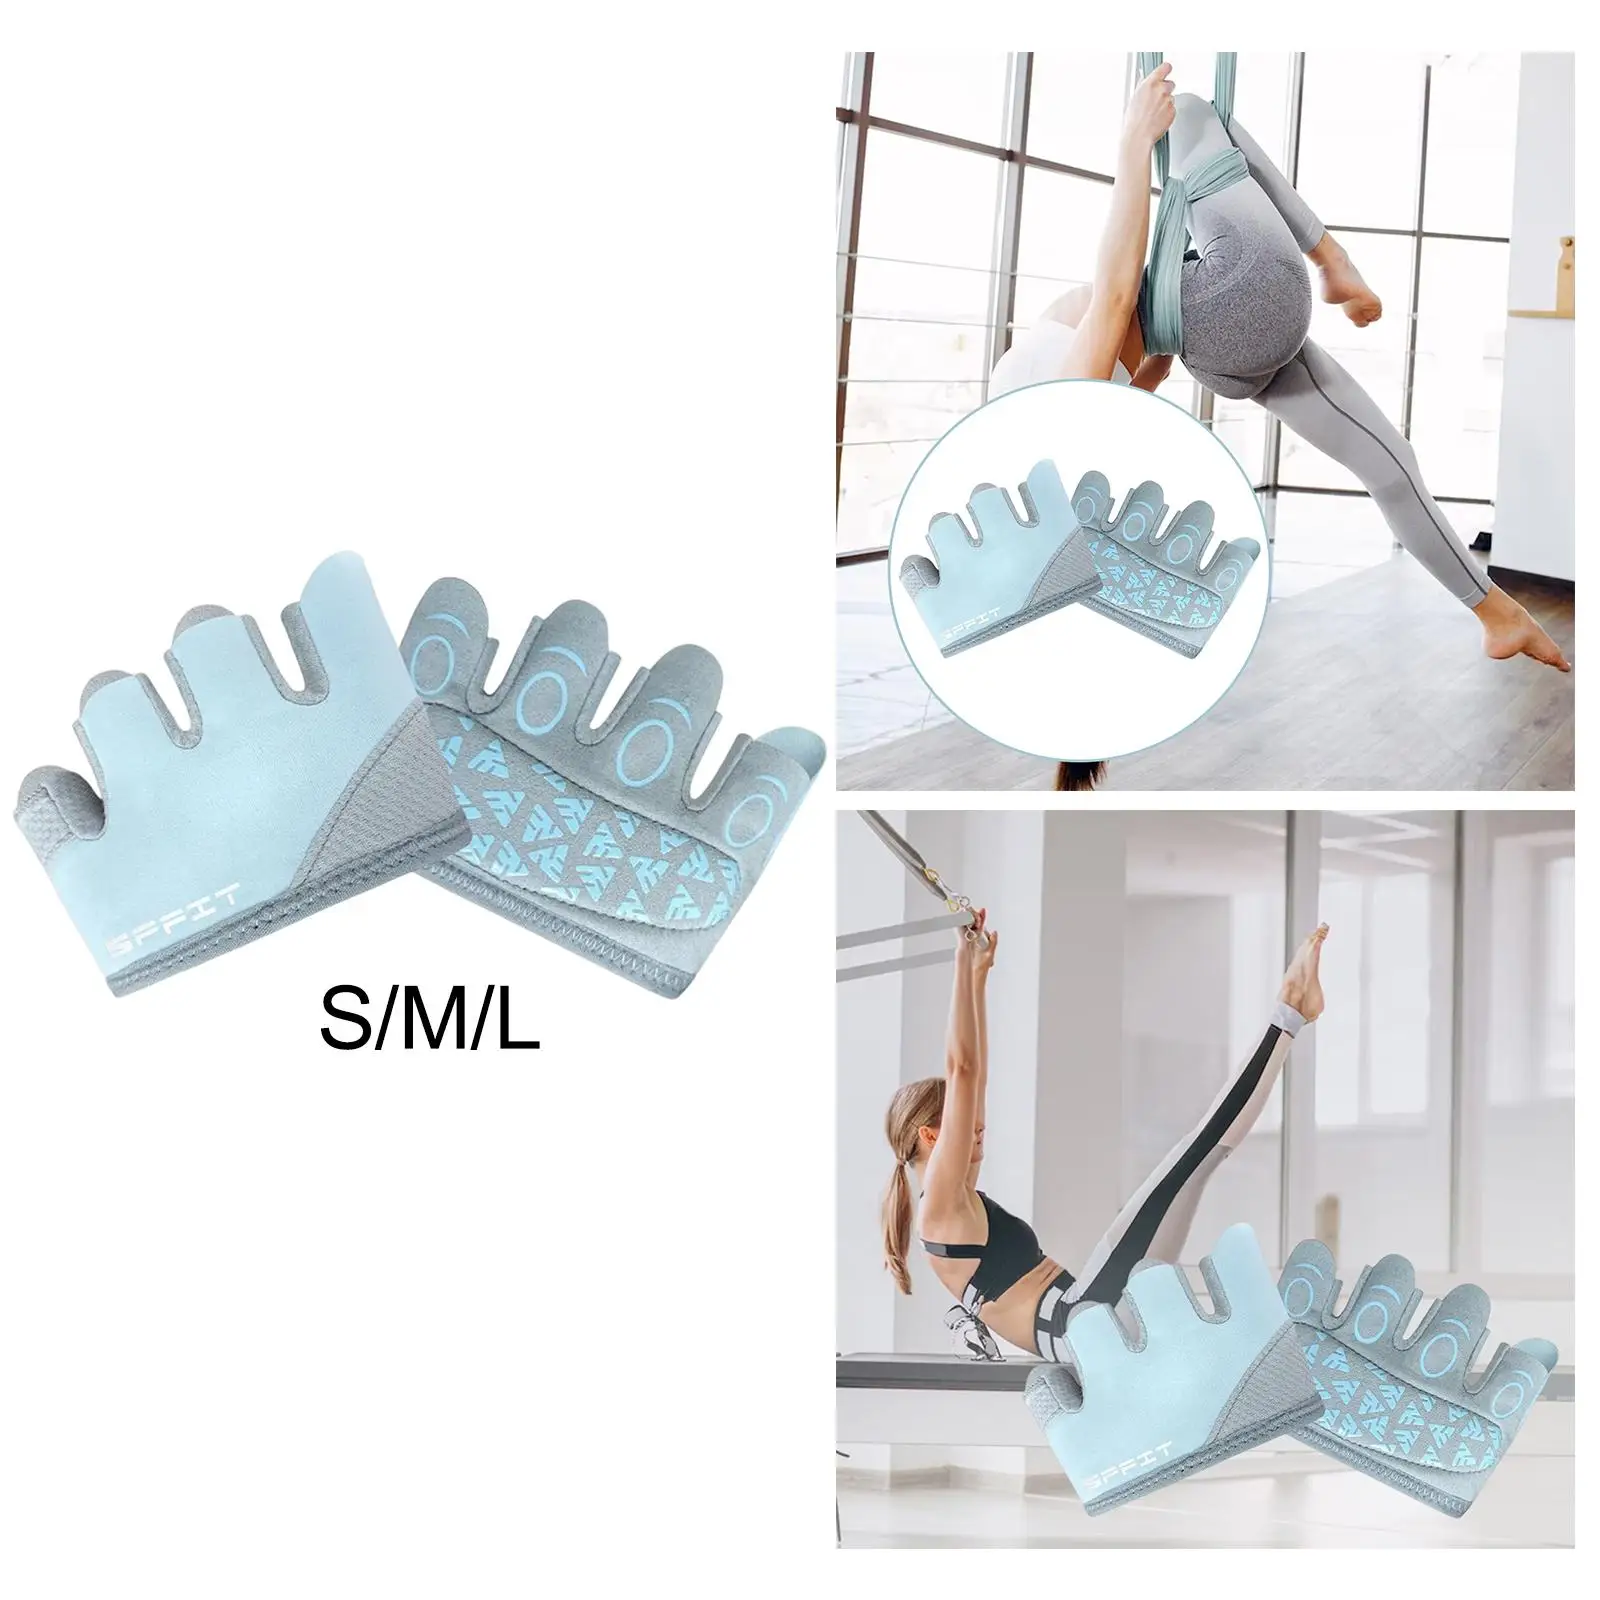 2Pcs Half Finger Workout Gloves Women Yoga Gloves Weight Lifting Gloves Anti Skid Palm Protection Padded for Exercise Pull up